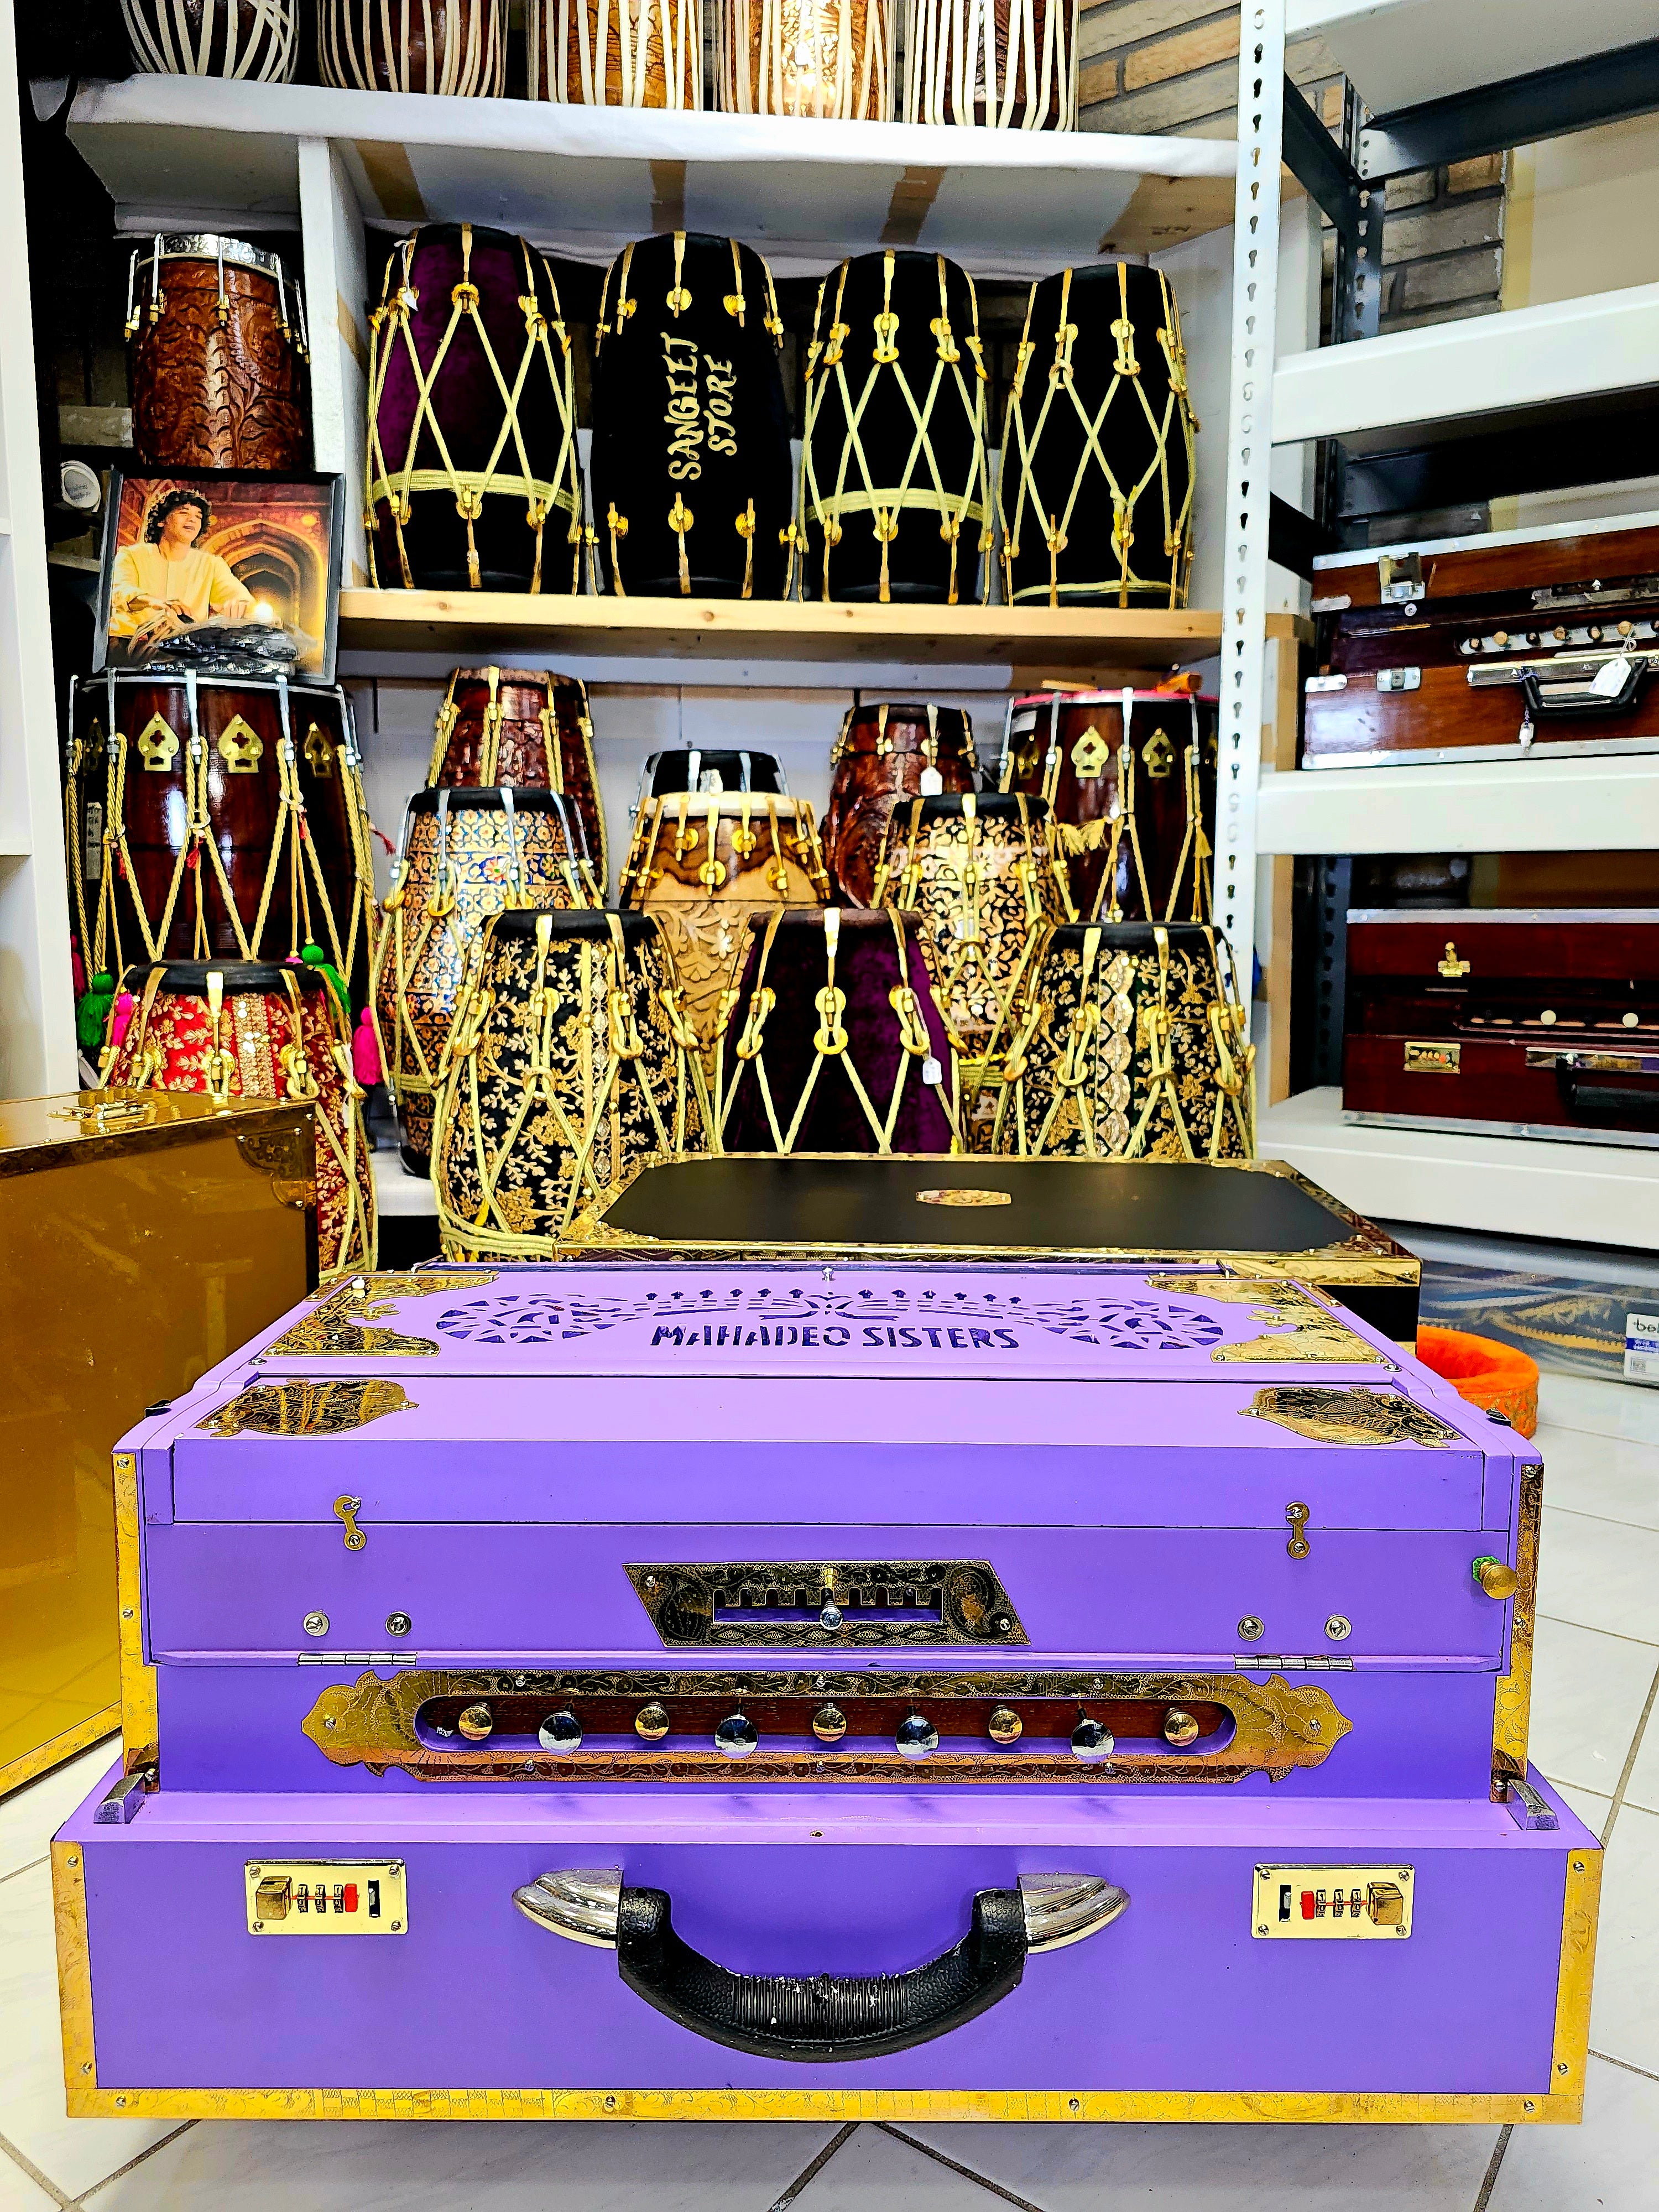 Mahadeo Sisters' Signature Harmony: Custom Matte Violet 9 Scale-Changer 3 Reed MMF Sangeet Store Harmonium with Black Keys and Gold Accessories